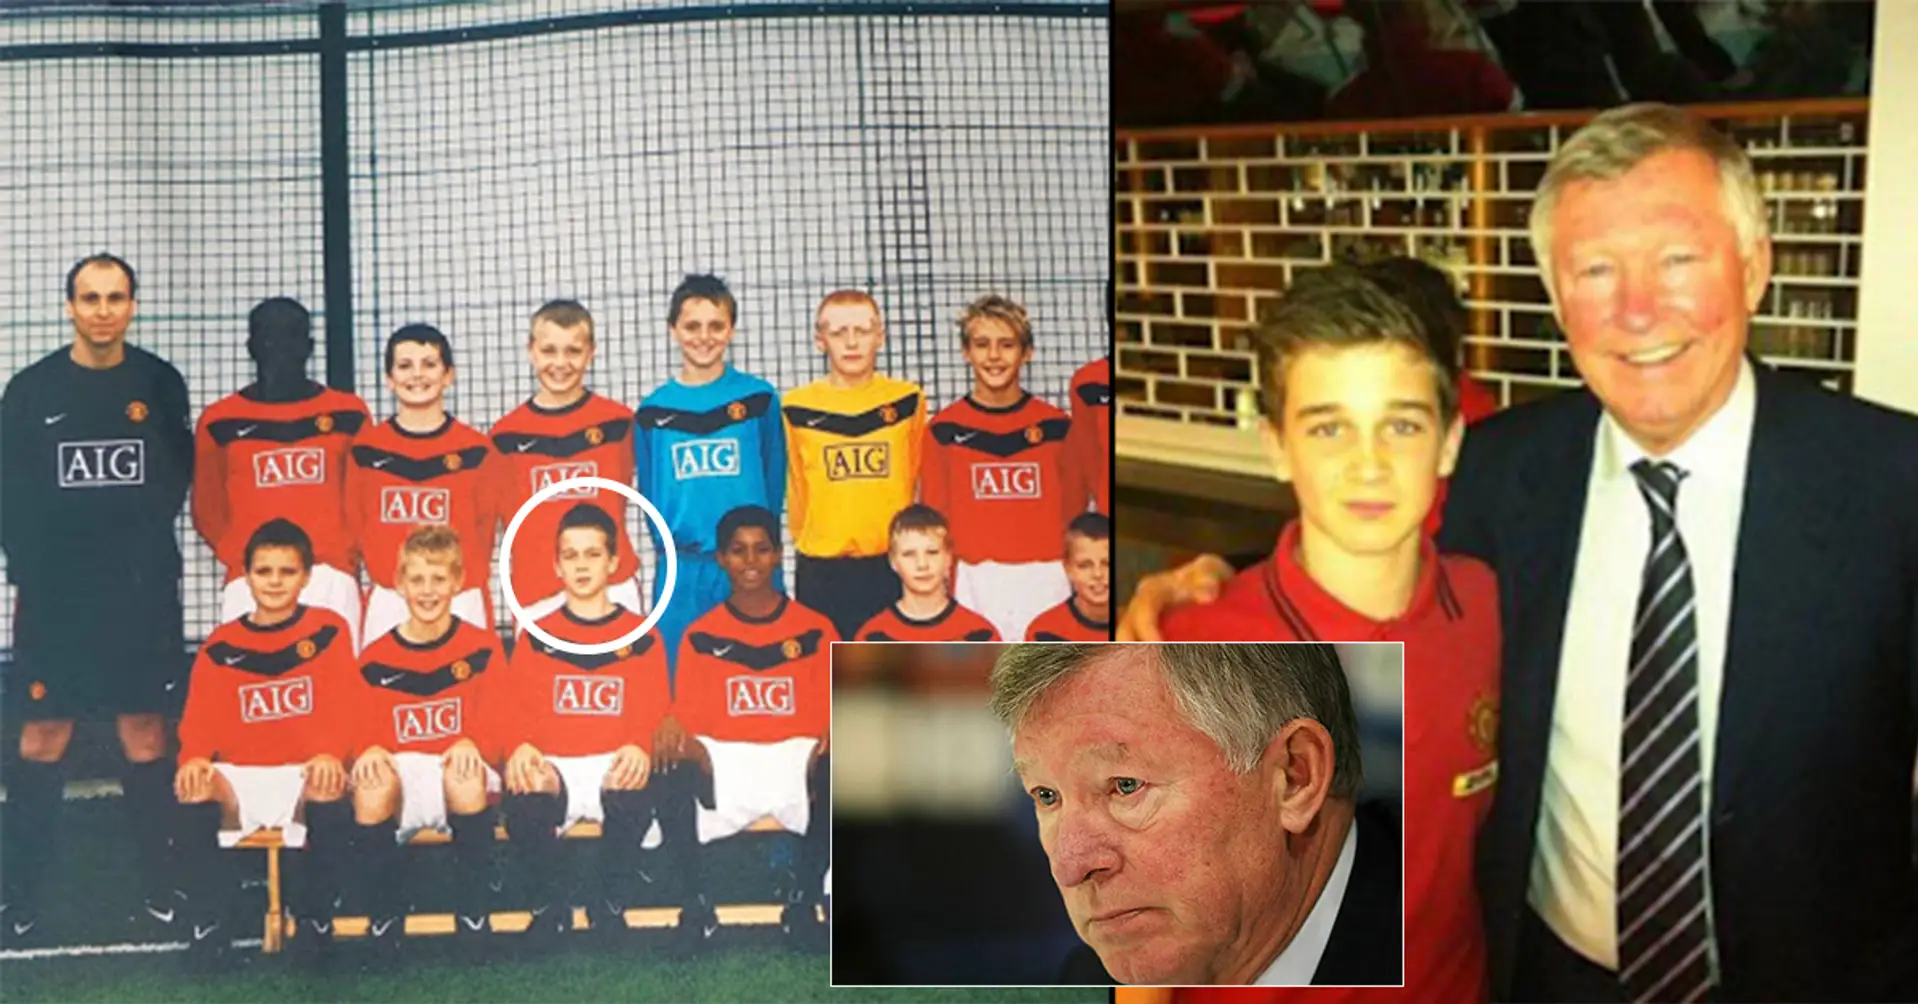 Manchester United scouts found him when he was just 9 years old – where is he now?